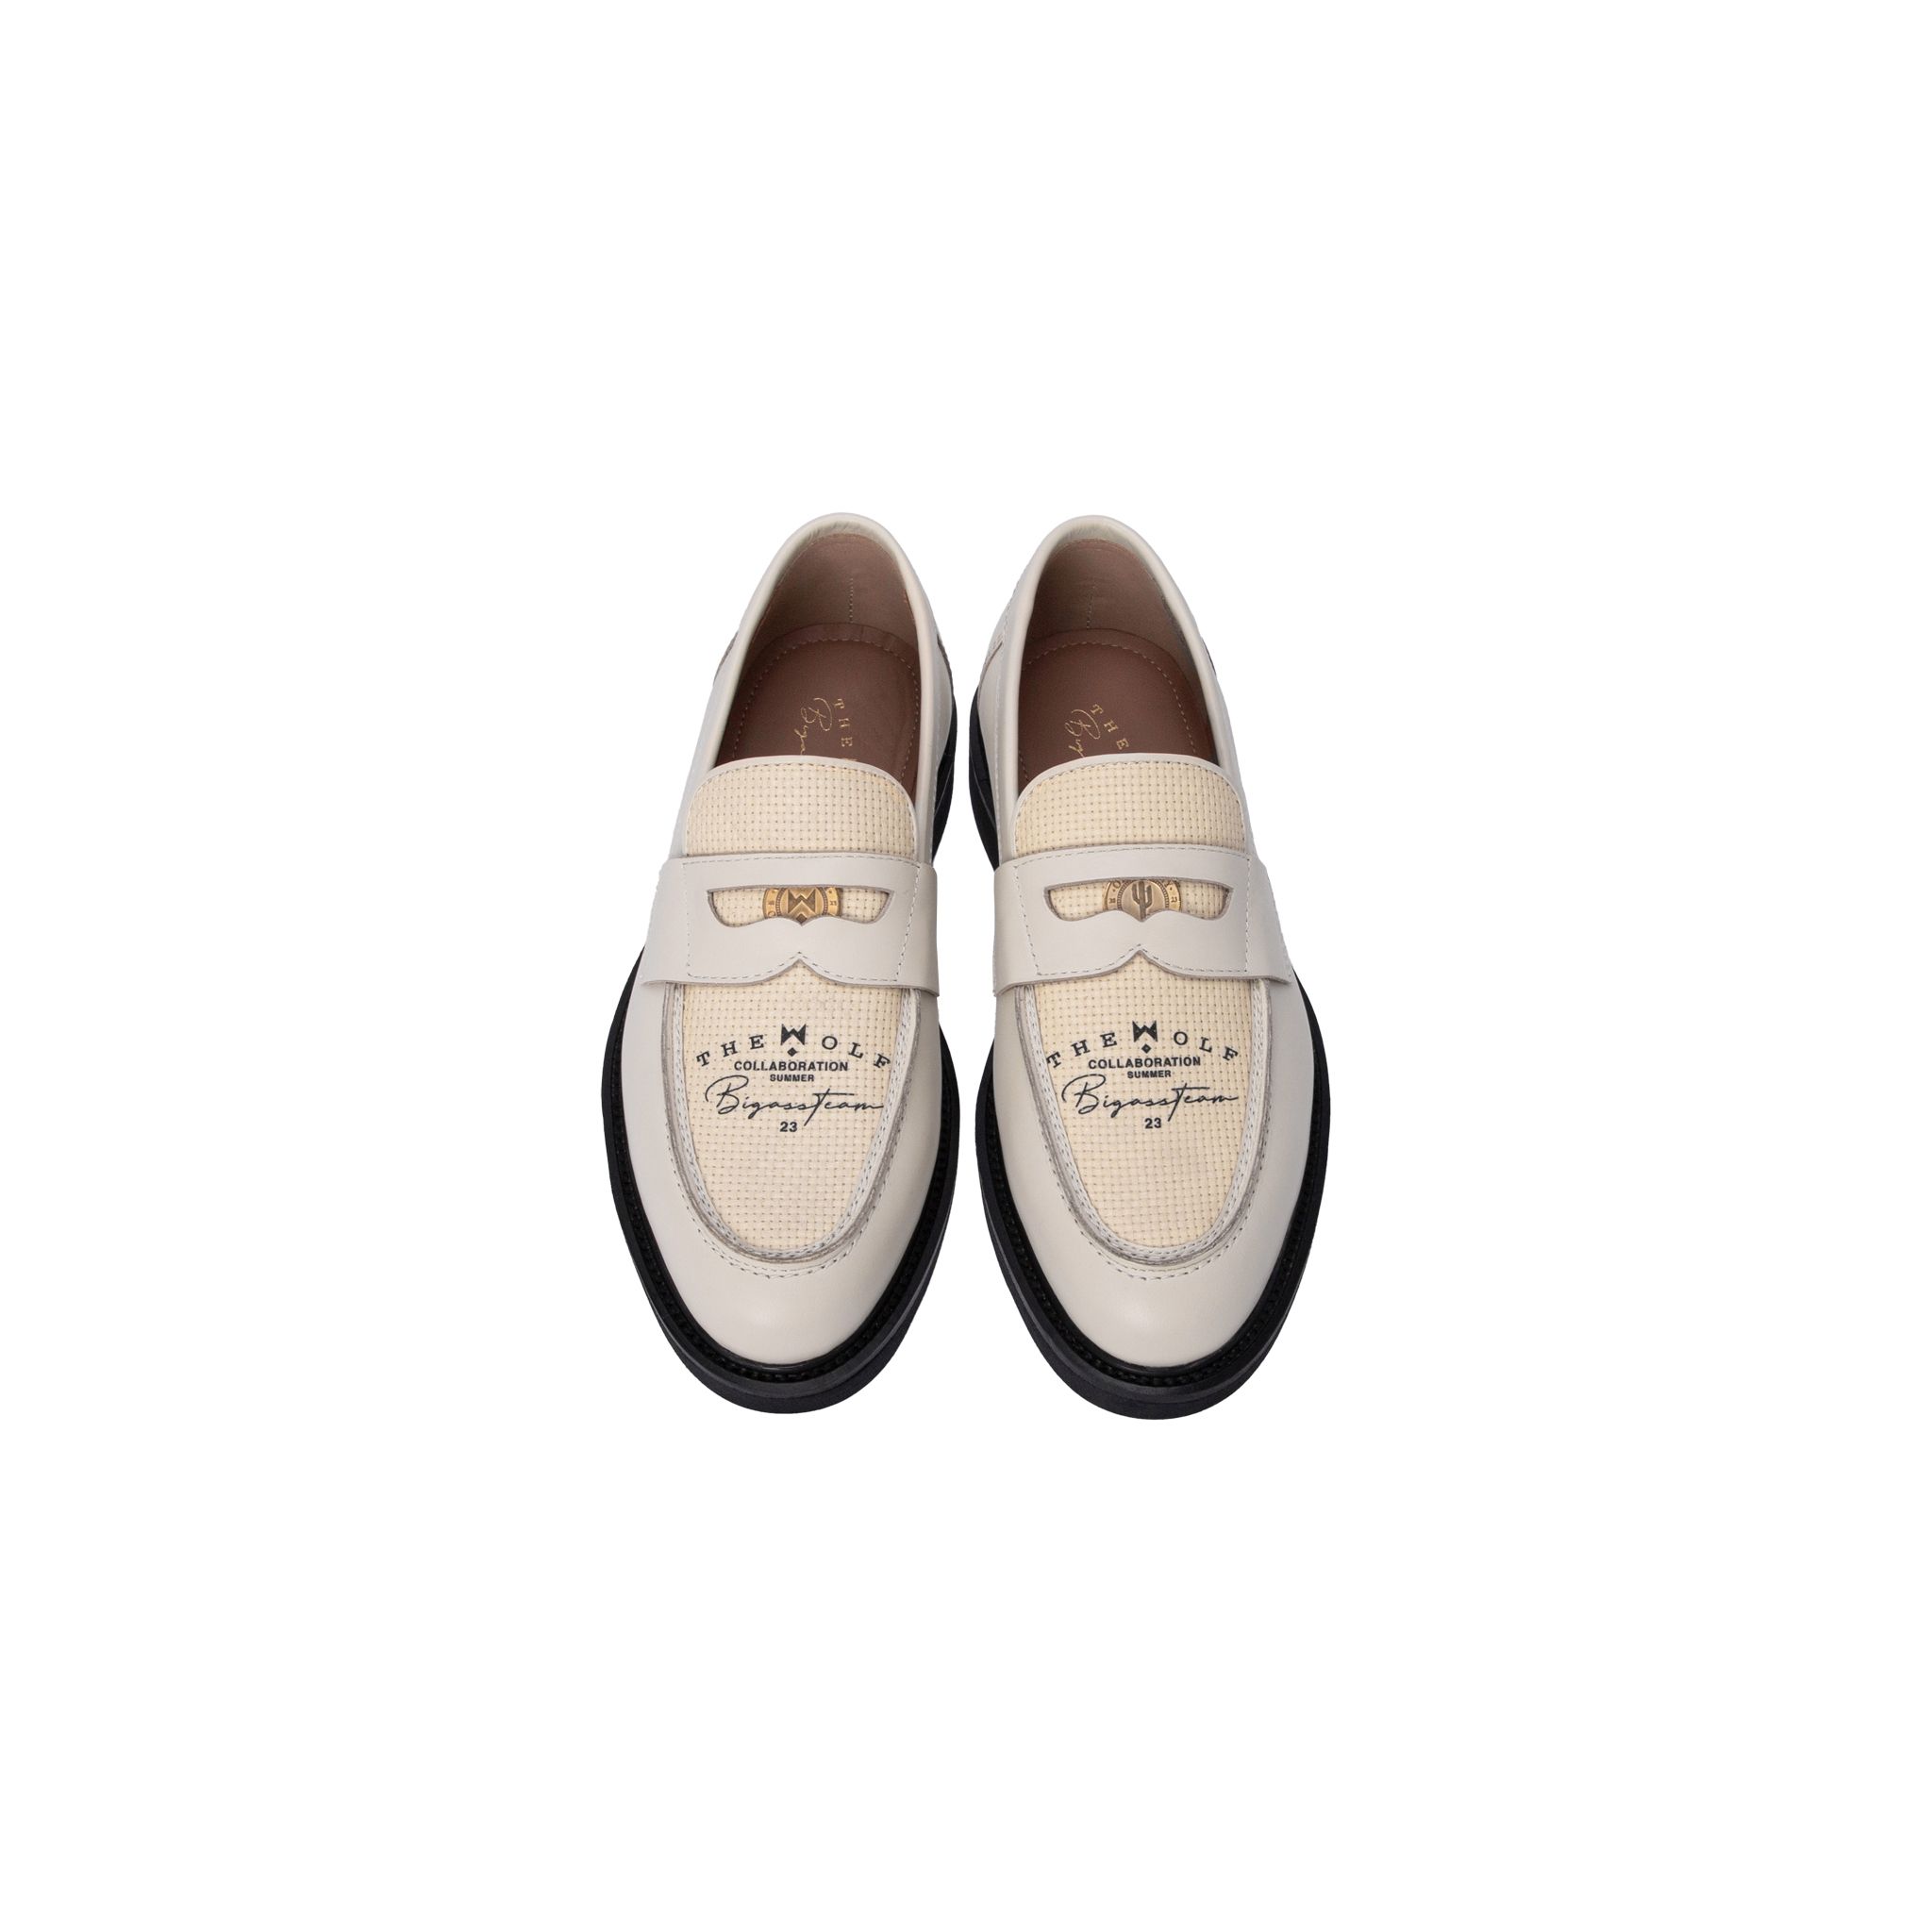  THE SUMMER AFTERTASTE PENNY LOAFER - WOVEN 